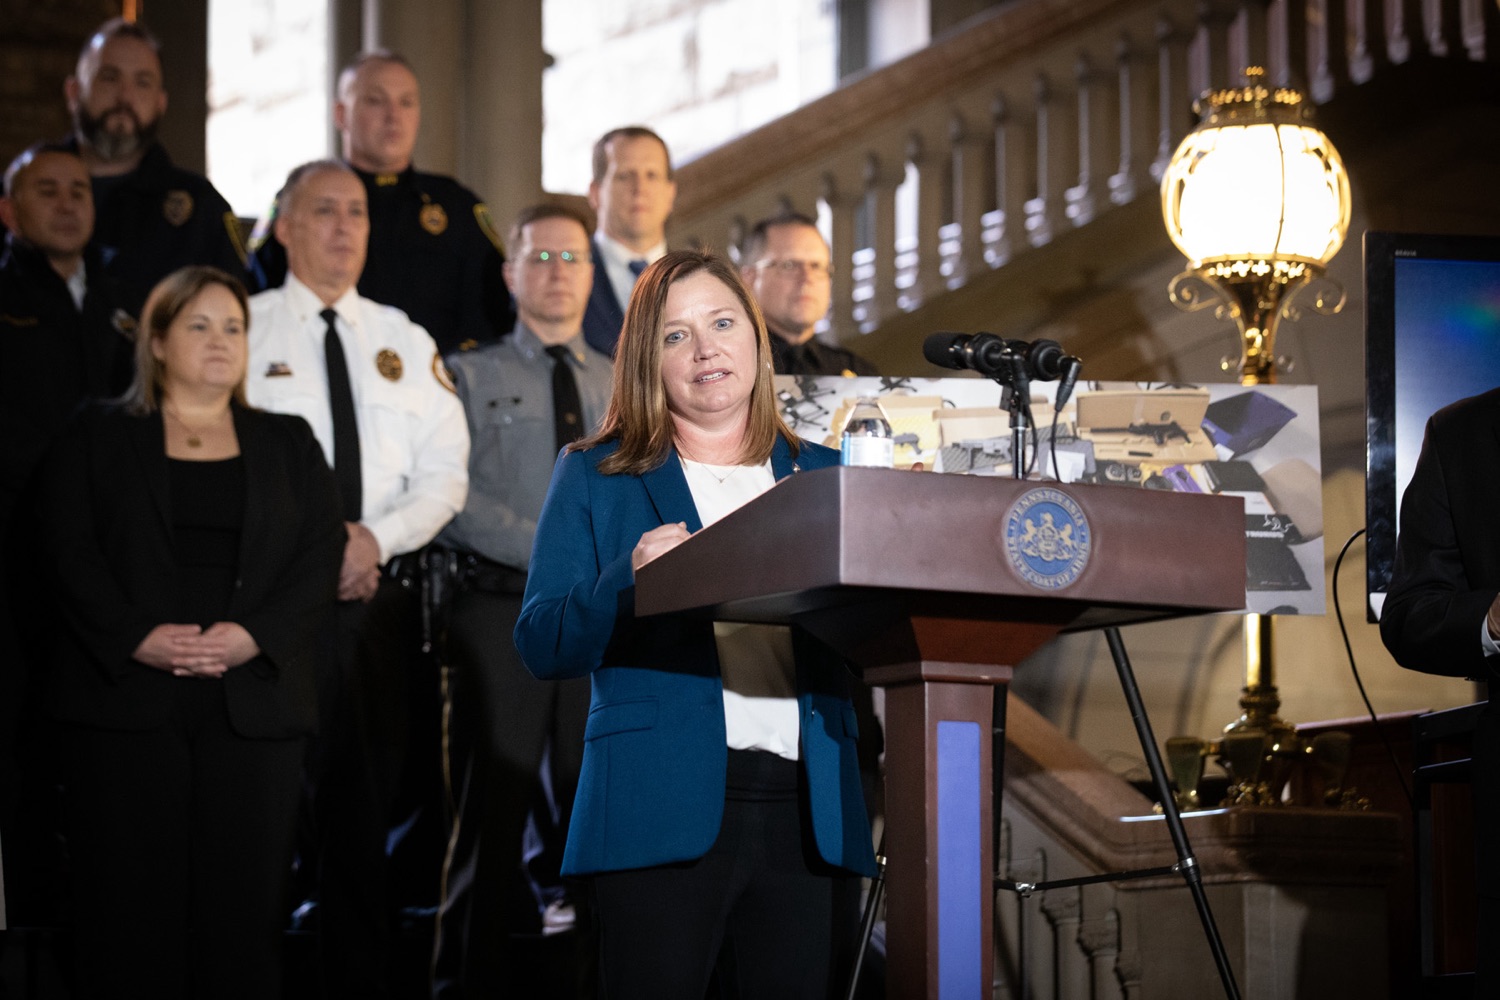 Pennsylvania Attorney General Michelle Henry and Allegheny County District Attorney Stephen Zappala were joined by law enforcement and community collaborators to announce a new public safety initiative in Allegheny County. Pictured here is Michelle Henry, Attorney General of Pennsylvania, delivering remarks during the event. Pittsburgh, Pennsylvania.<br><a href="https://filesource.amperwave.net/commonwealthofpa/photo/24297_oag_publicSafety_JAP_13.jpg" target="_blank">⇣ Download Photo</a>